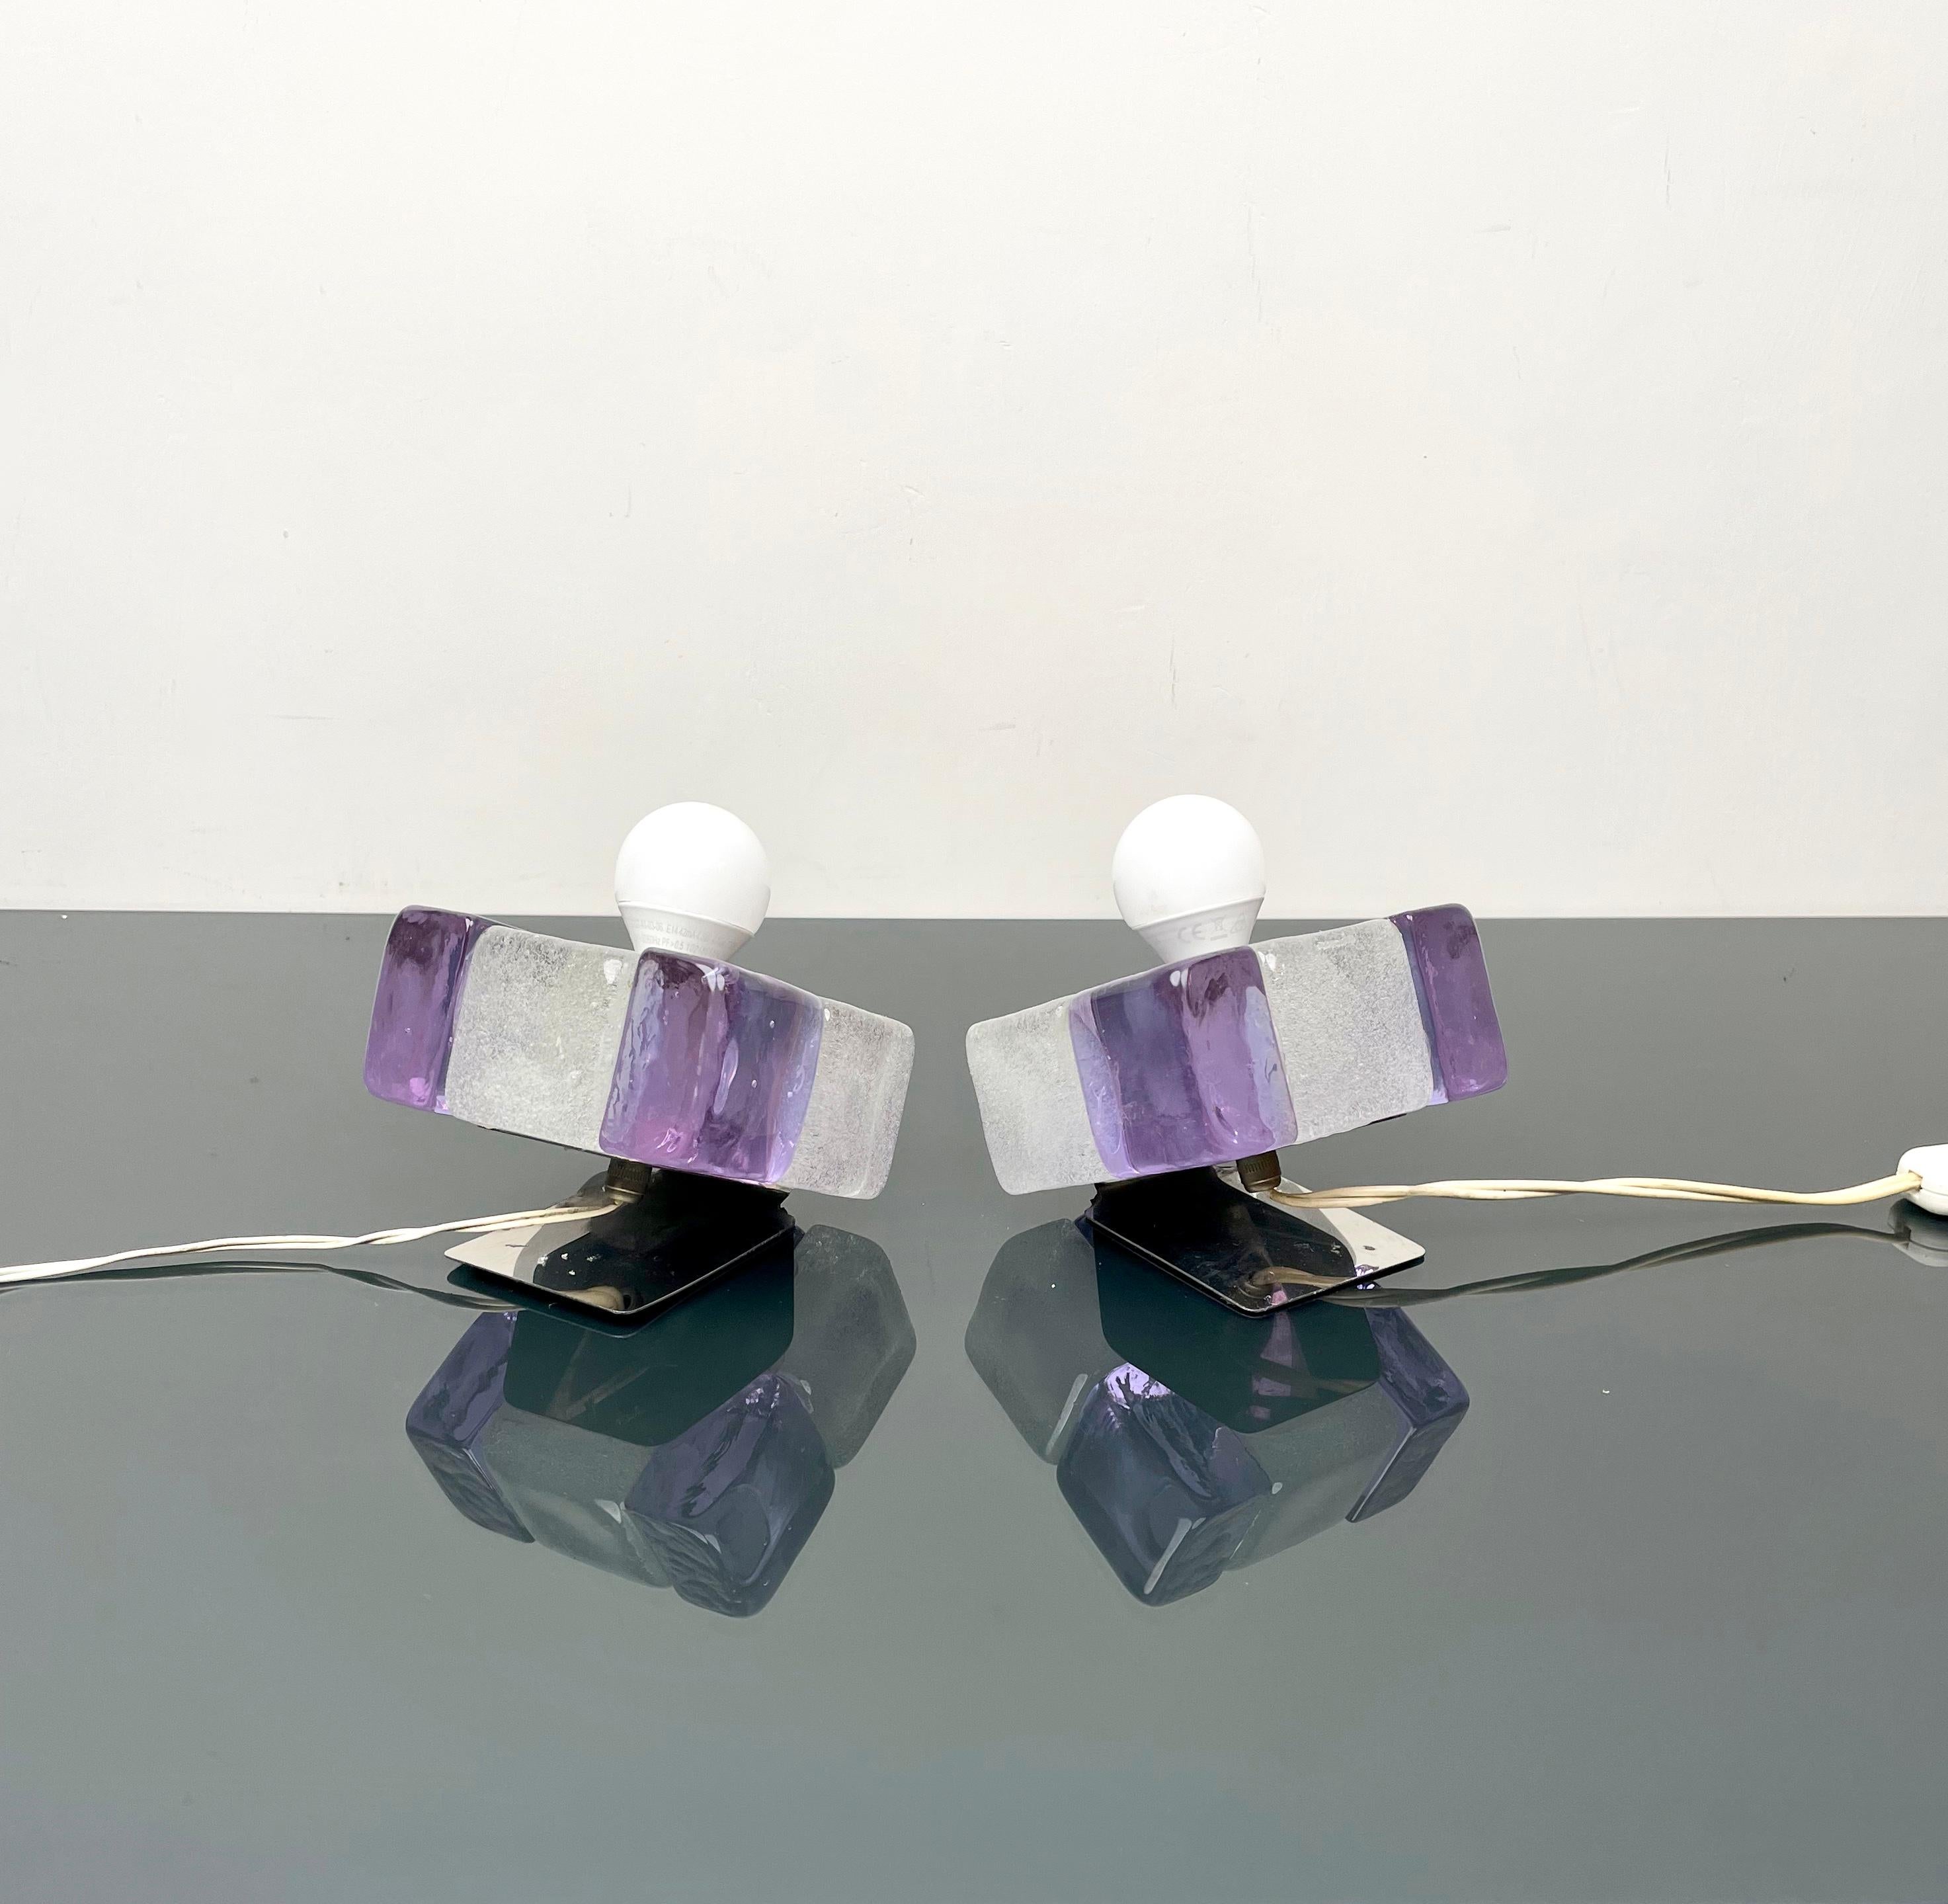 Pair of Table Lamp Murano Glass & Steel by Albano Poli for Poliarte, Italy 1970s For Sale 4